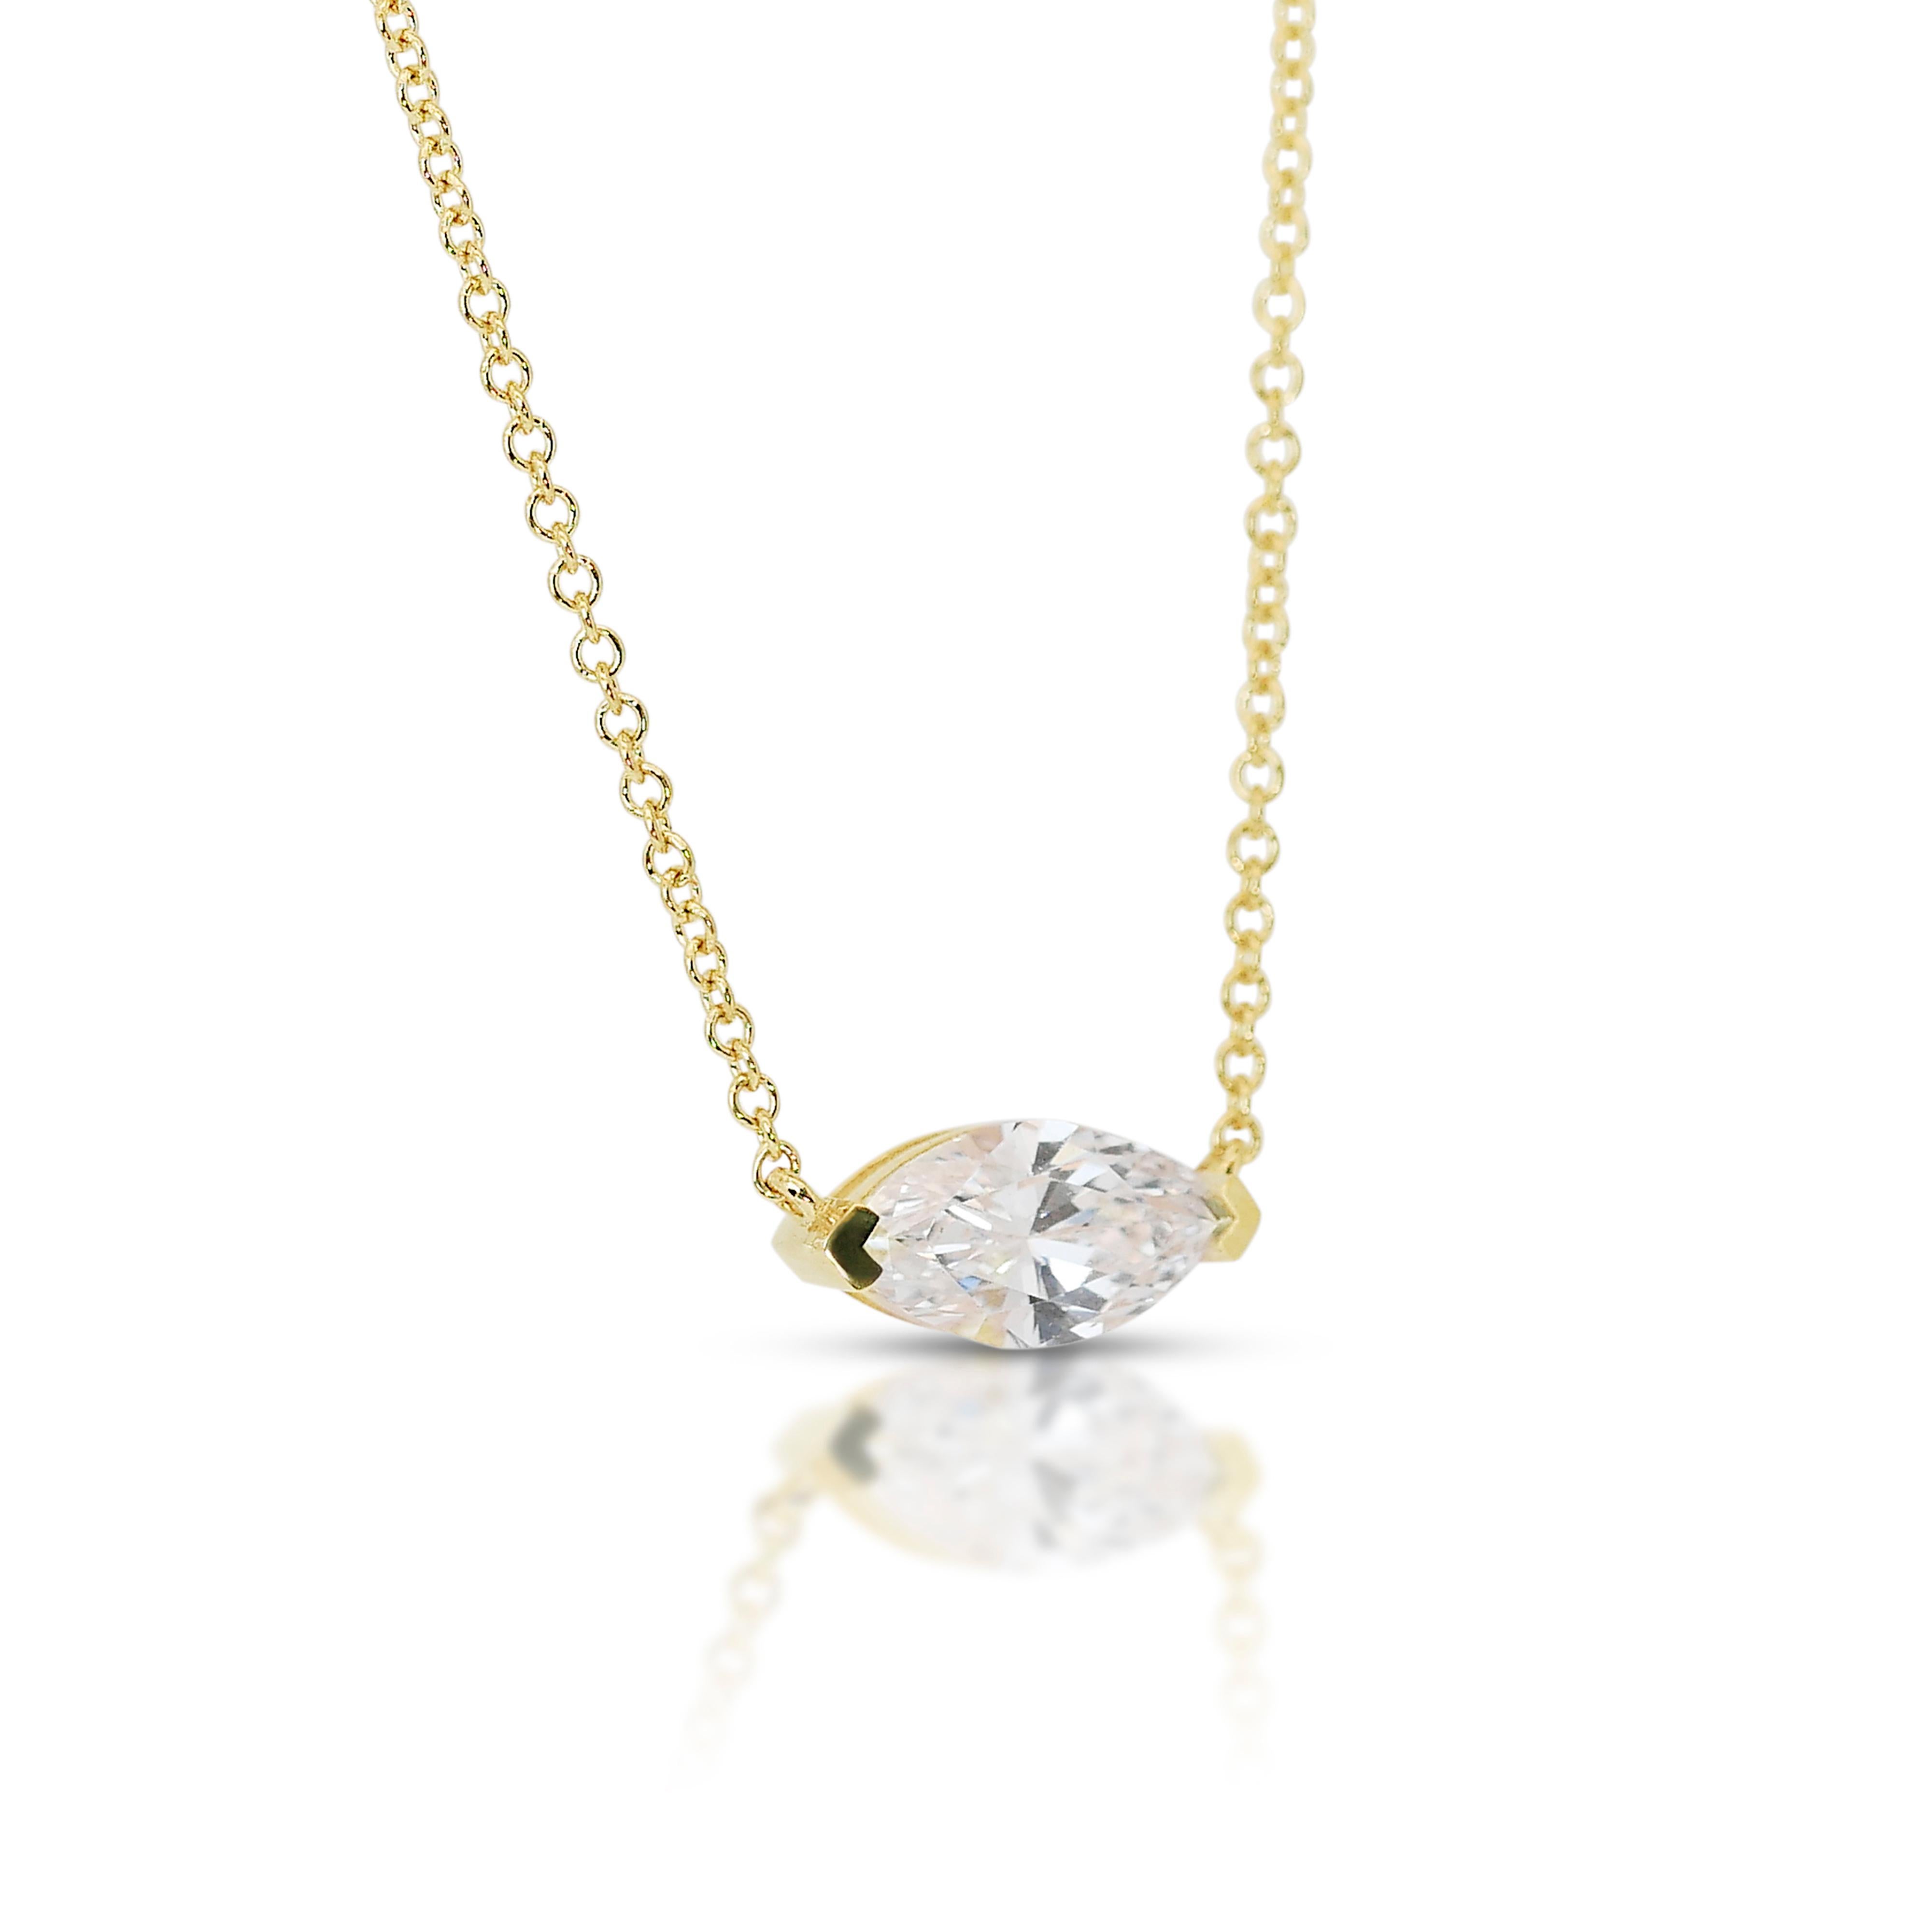 Marquise Cut Elegant 1.01ct Diamond Solitaire Necklace in 18k Yellow Gold - GIA Certified For Sale